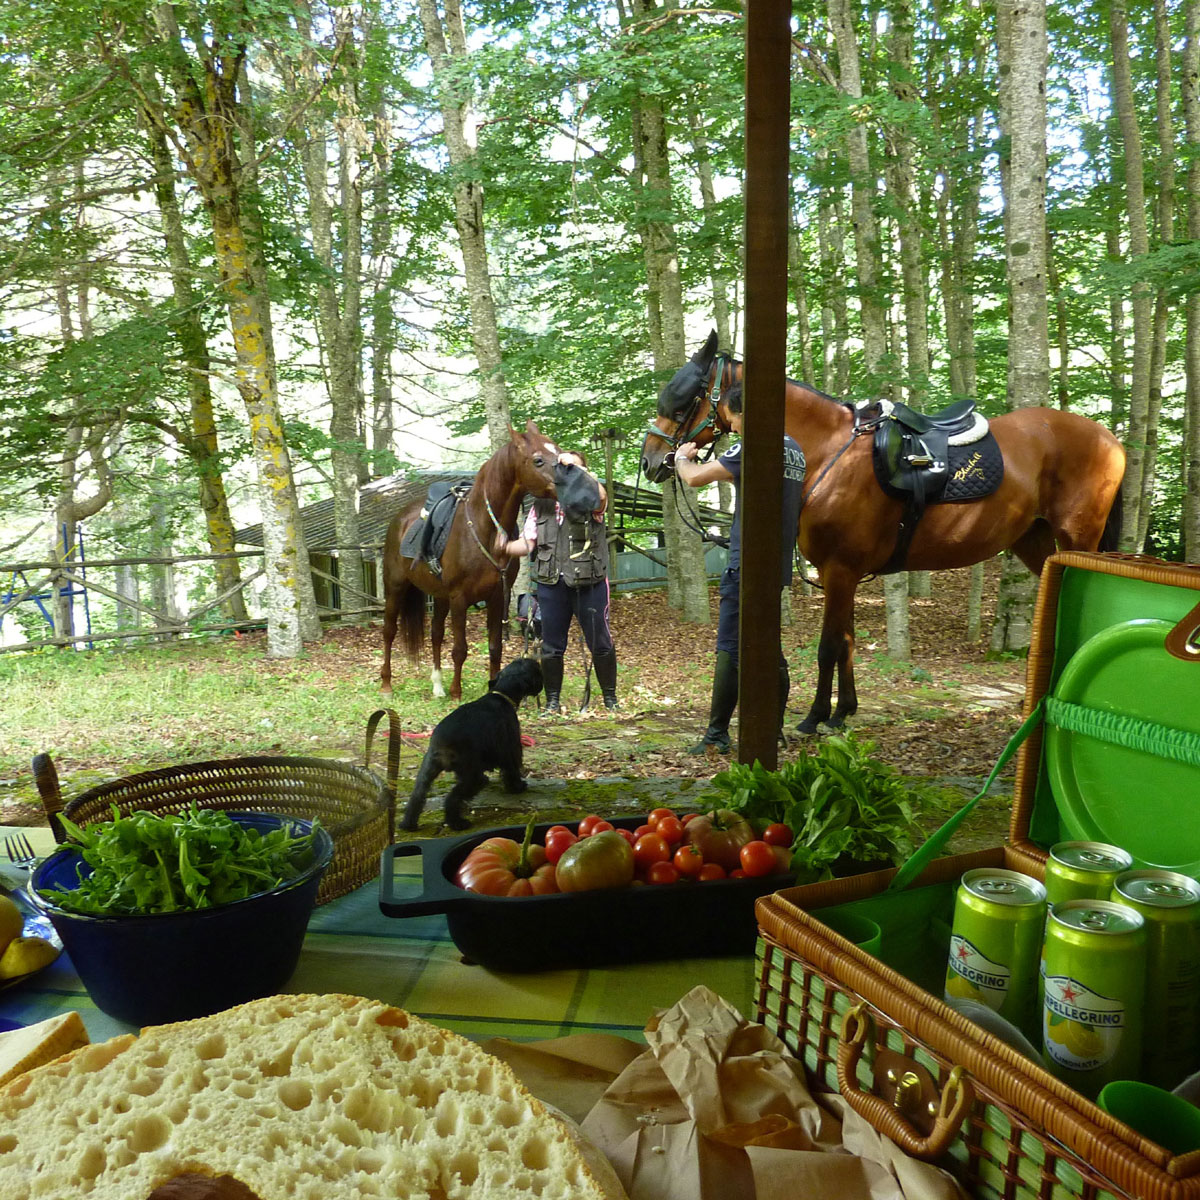 mediteranean picnic with horses and dogs